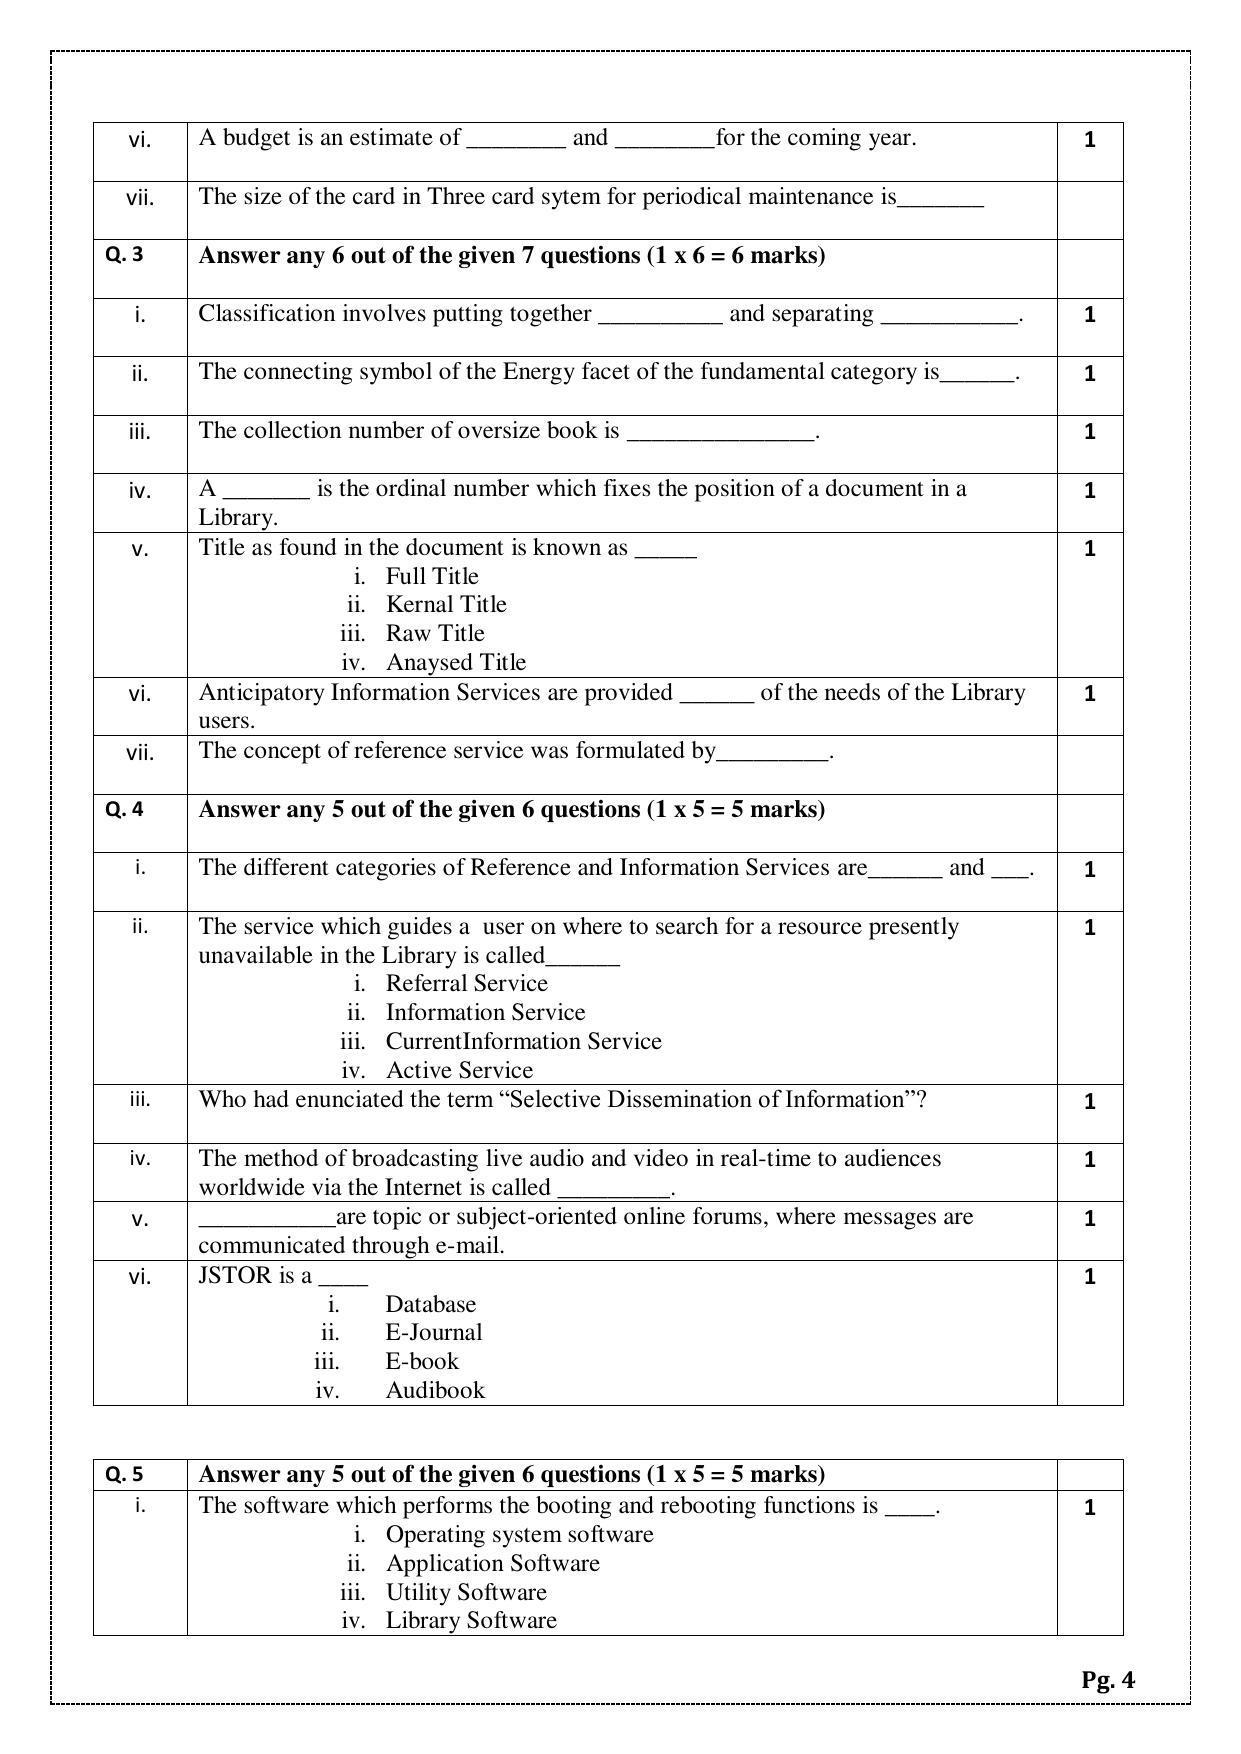 CBSE Class 10 Library & Information Science (Skill Education) Sample Papers 2023 - Page 4